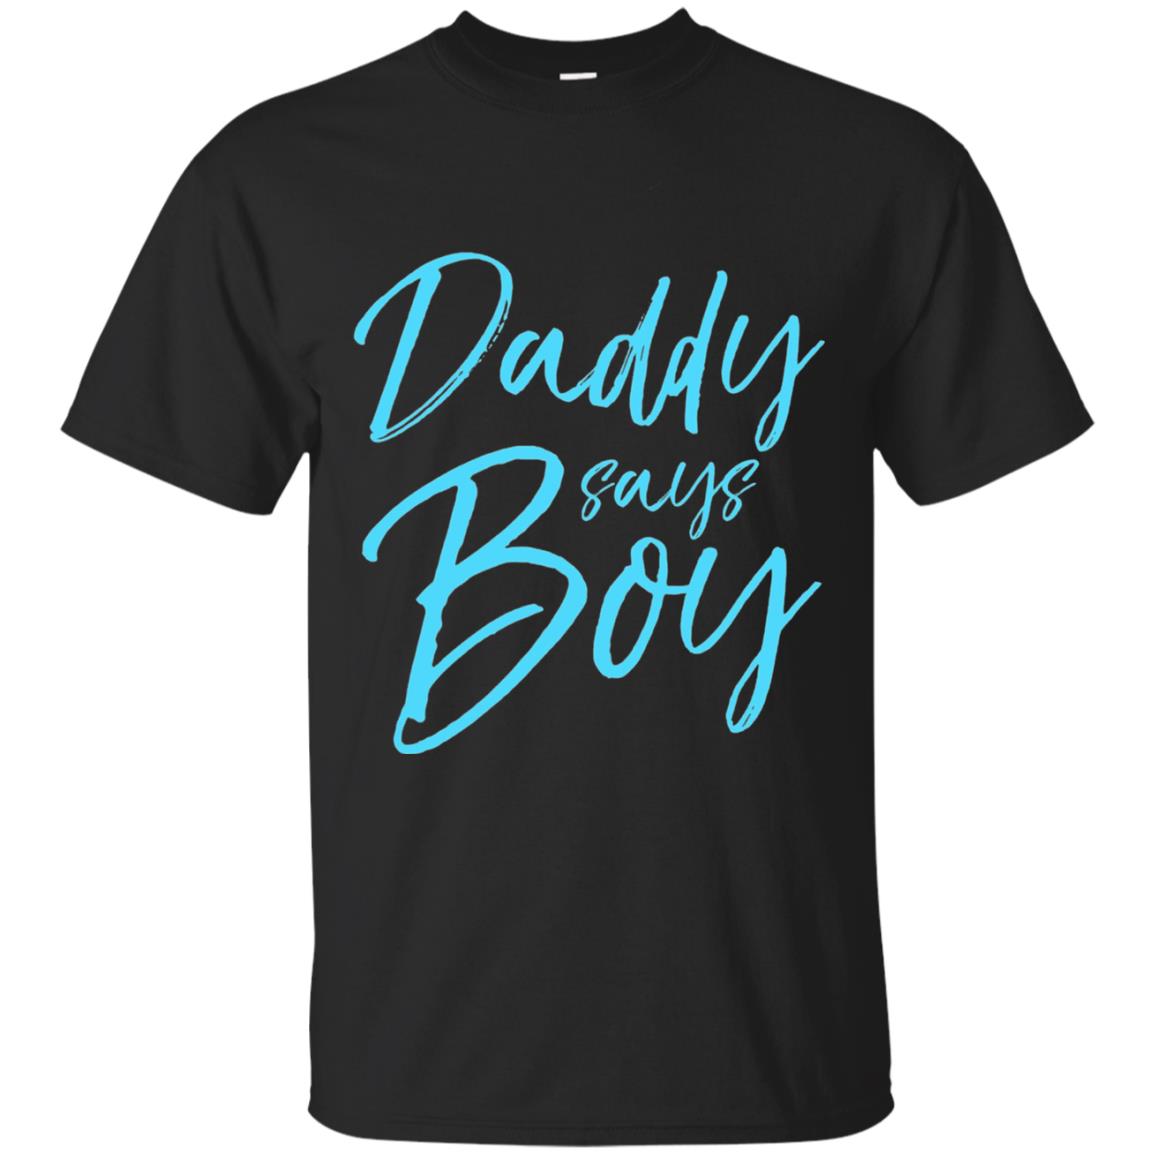 Daddy Says Boy Blue Gender Reveal Announcement